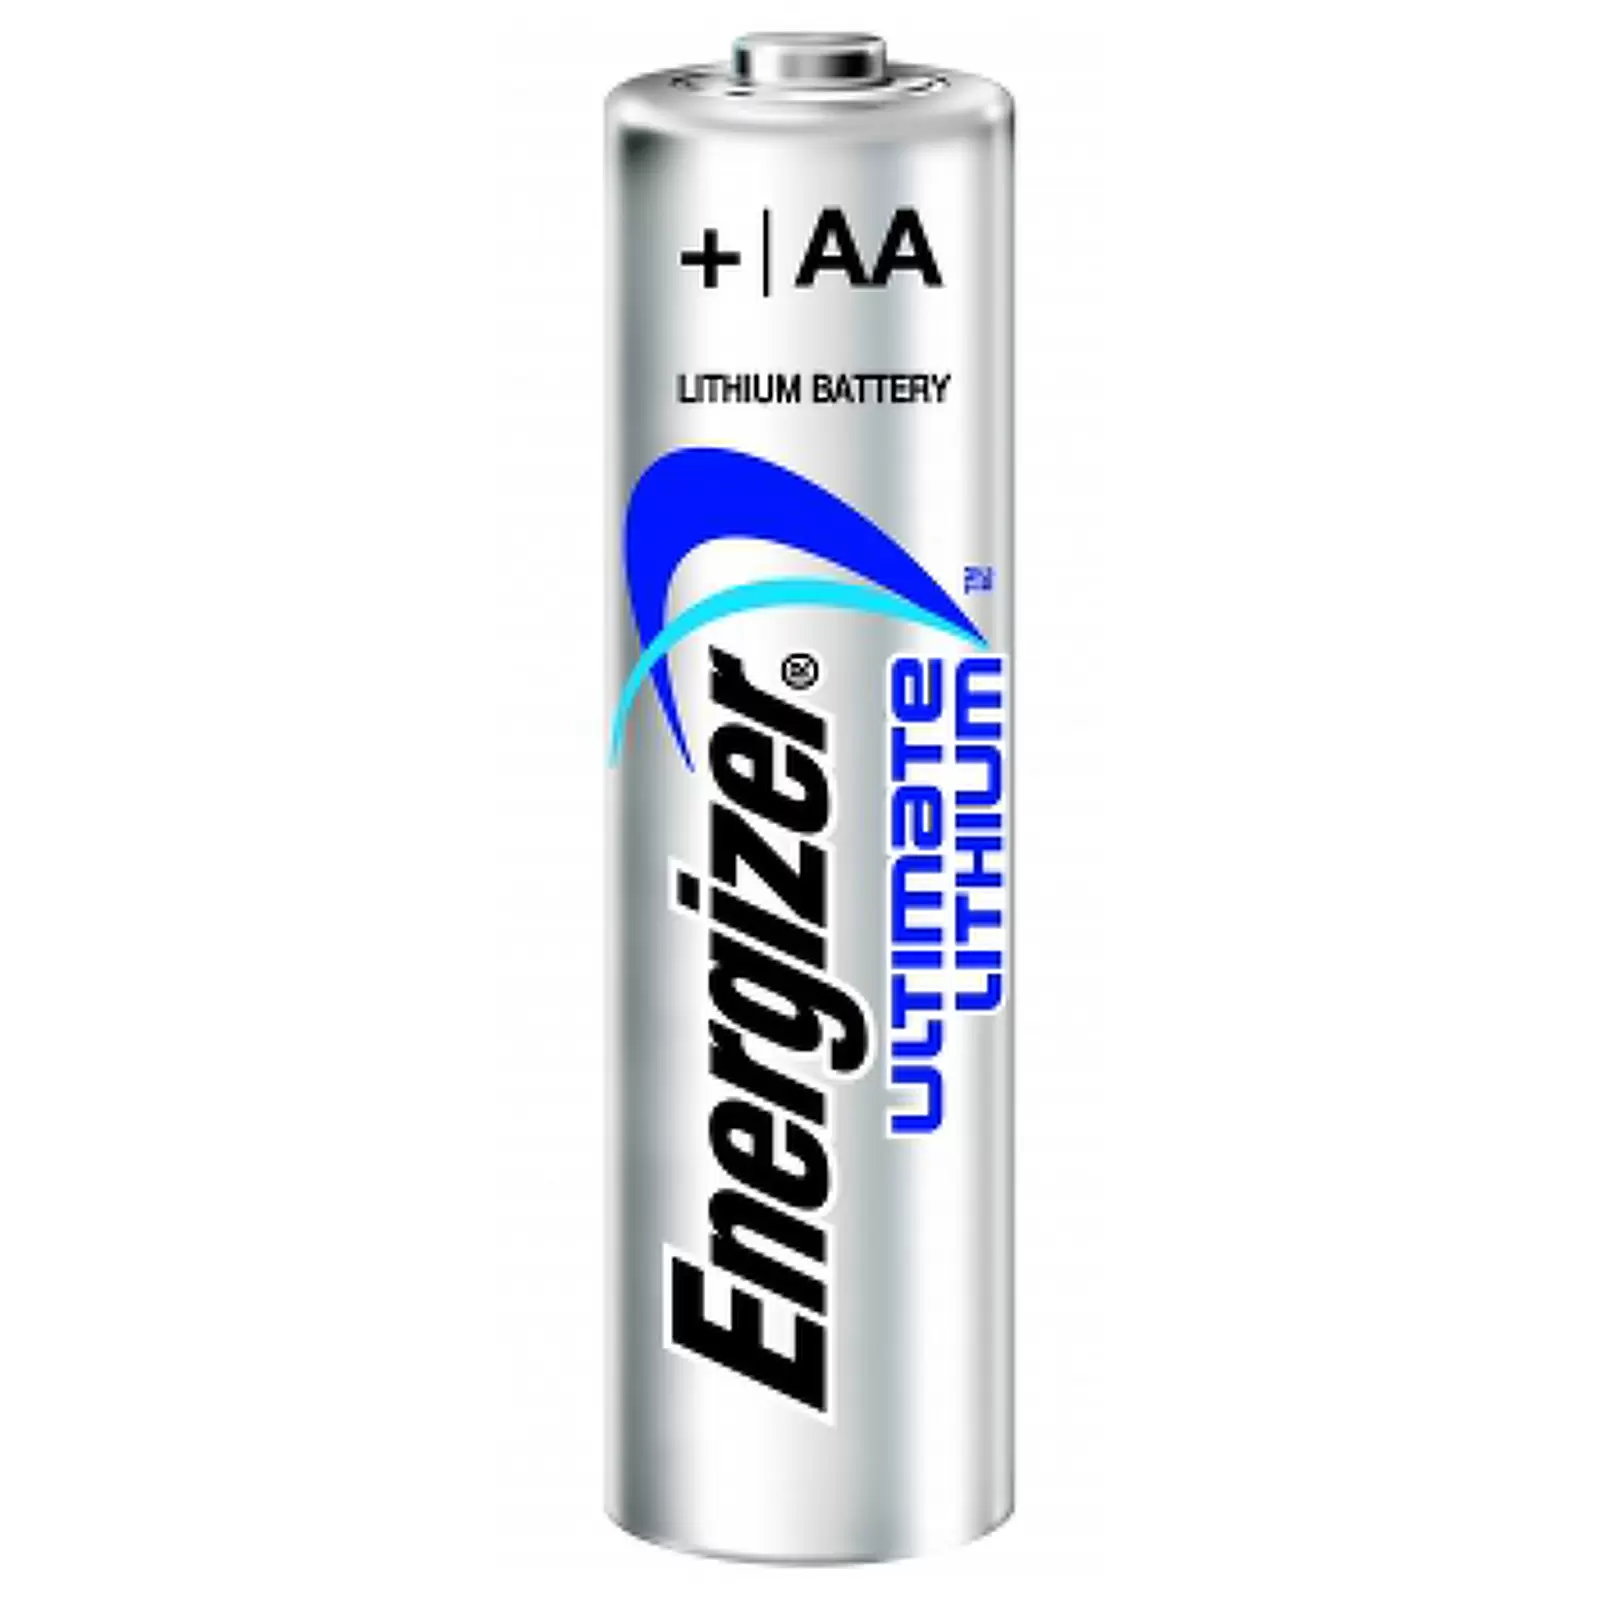 Energizer Ultimate Lithium AA Mignon Batterie 10er Pack